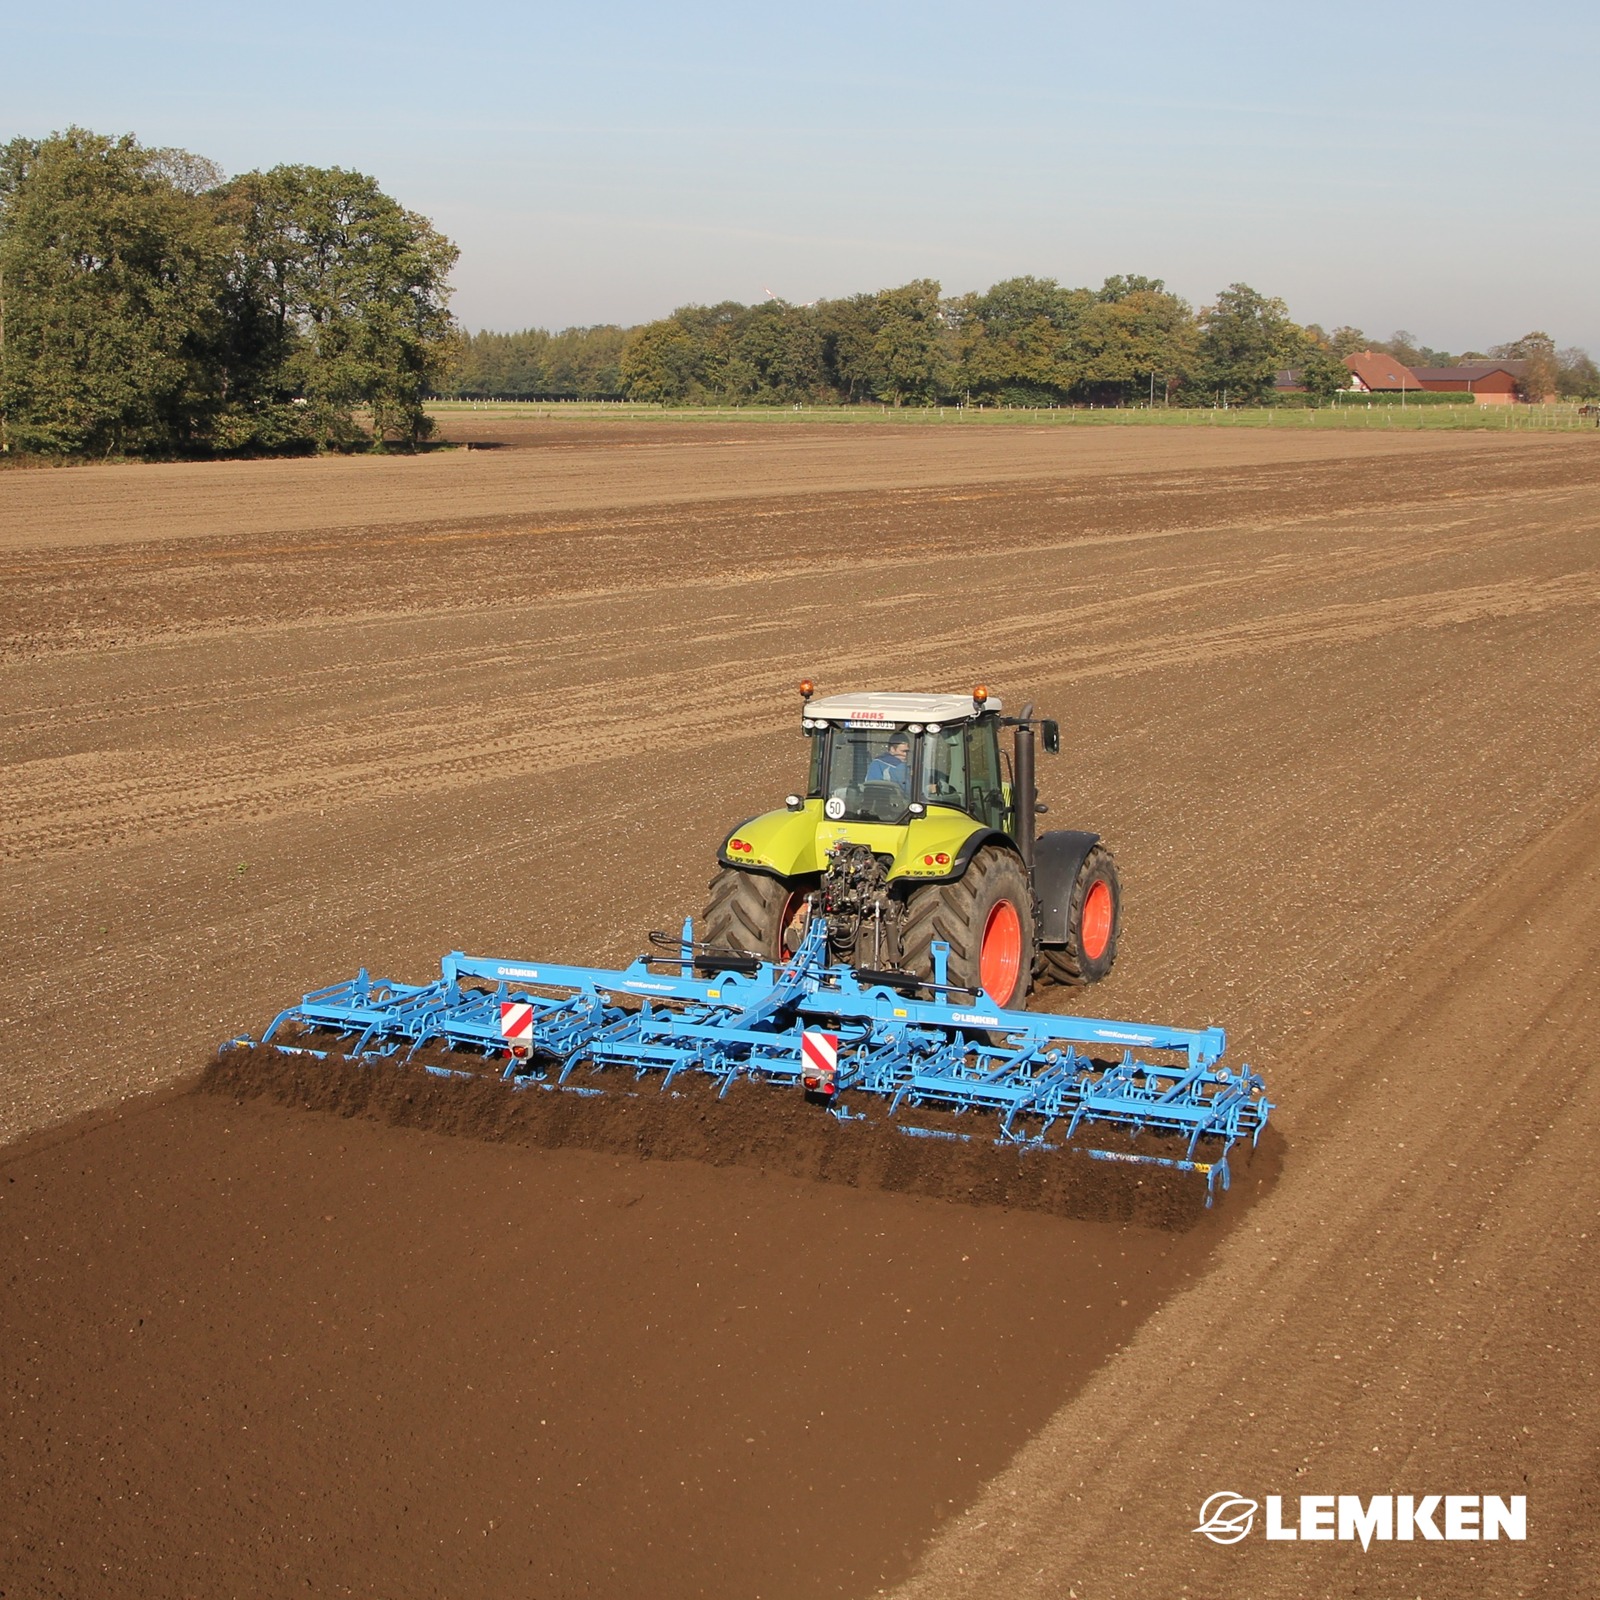 Our Korund 8 combines high work quality with high output. A multi-levelling bar that guarantees optimum levelling of the...